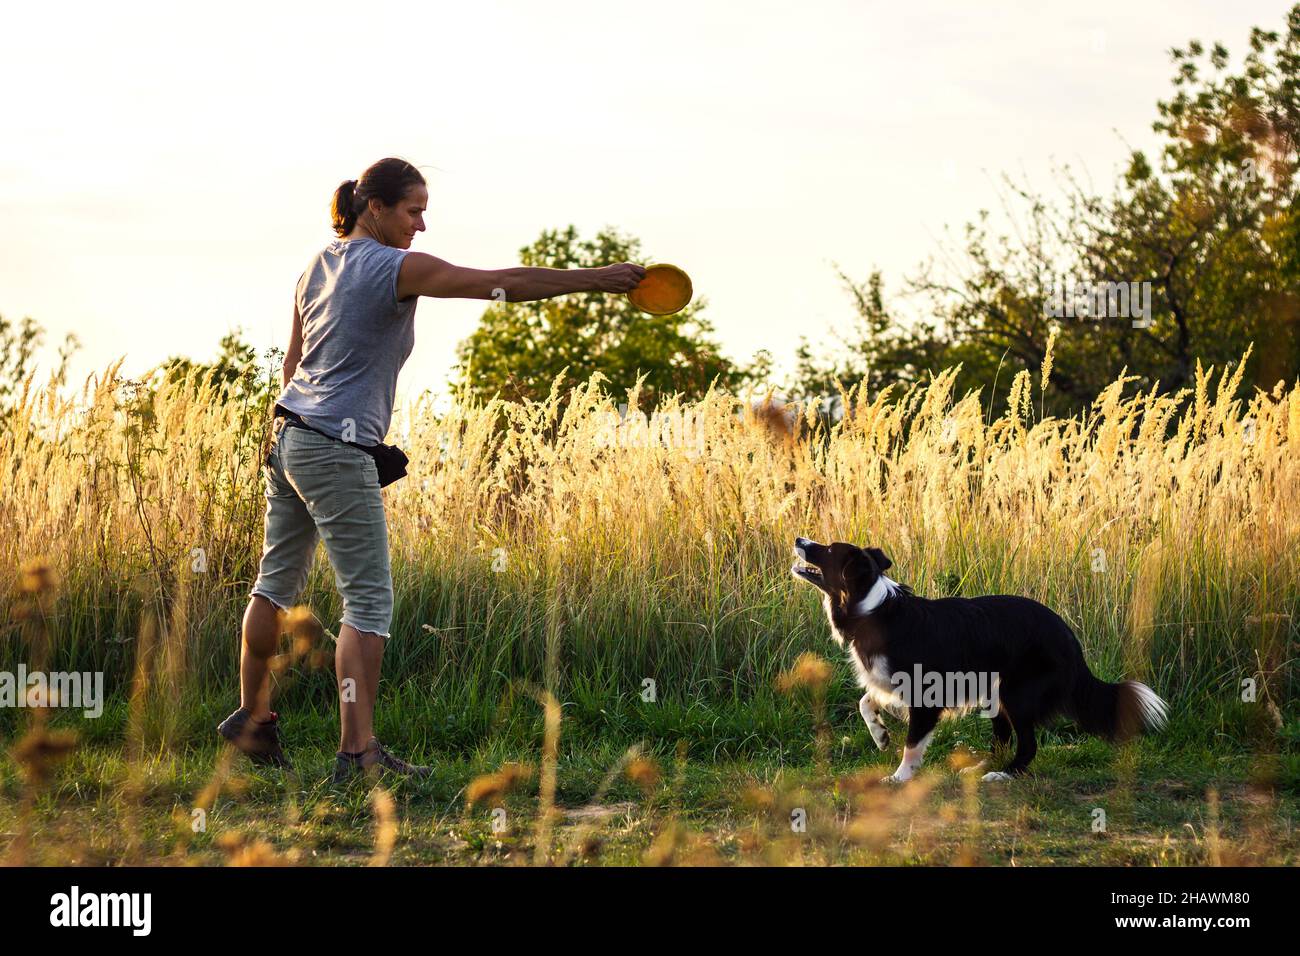 Woman throwing plastic disk to her border collie. Dog playing with pet toy. Animal trainer obedience training her dog Stock Photo